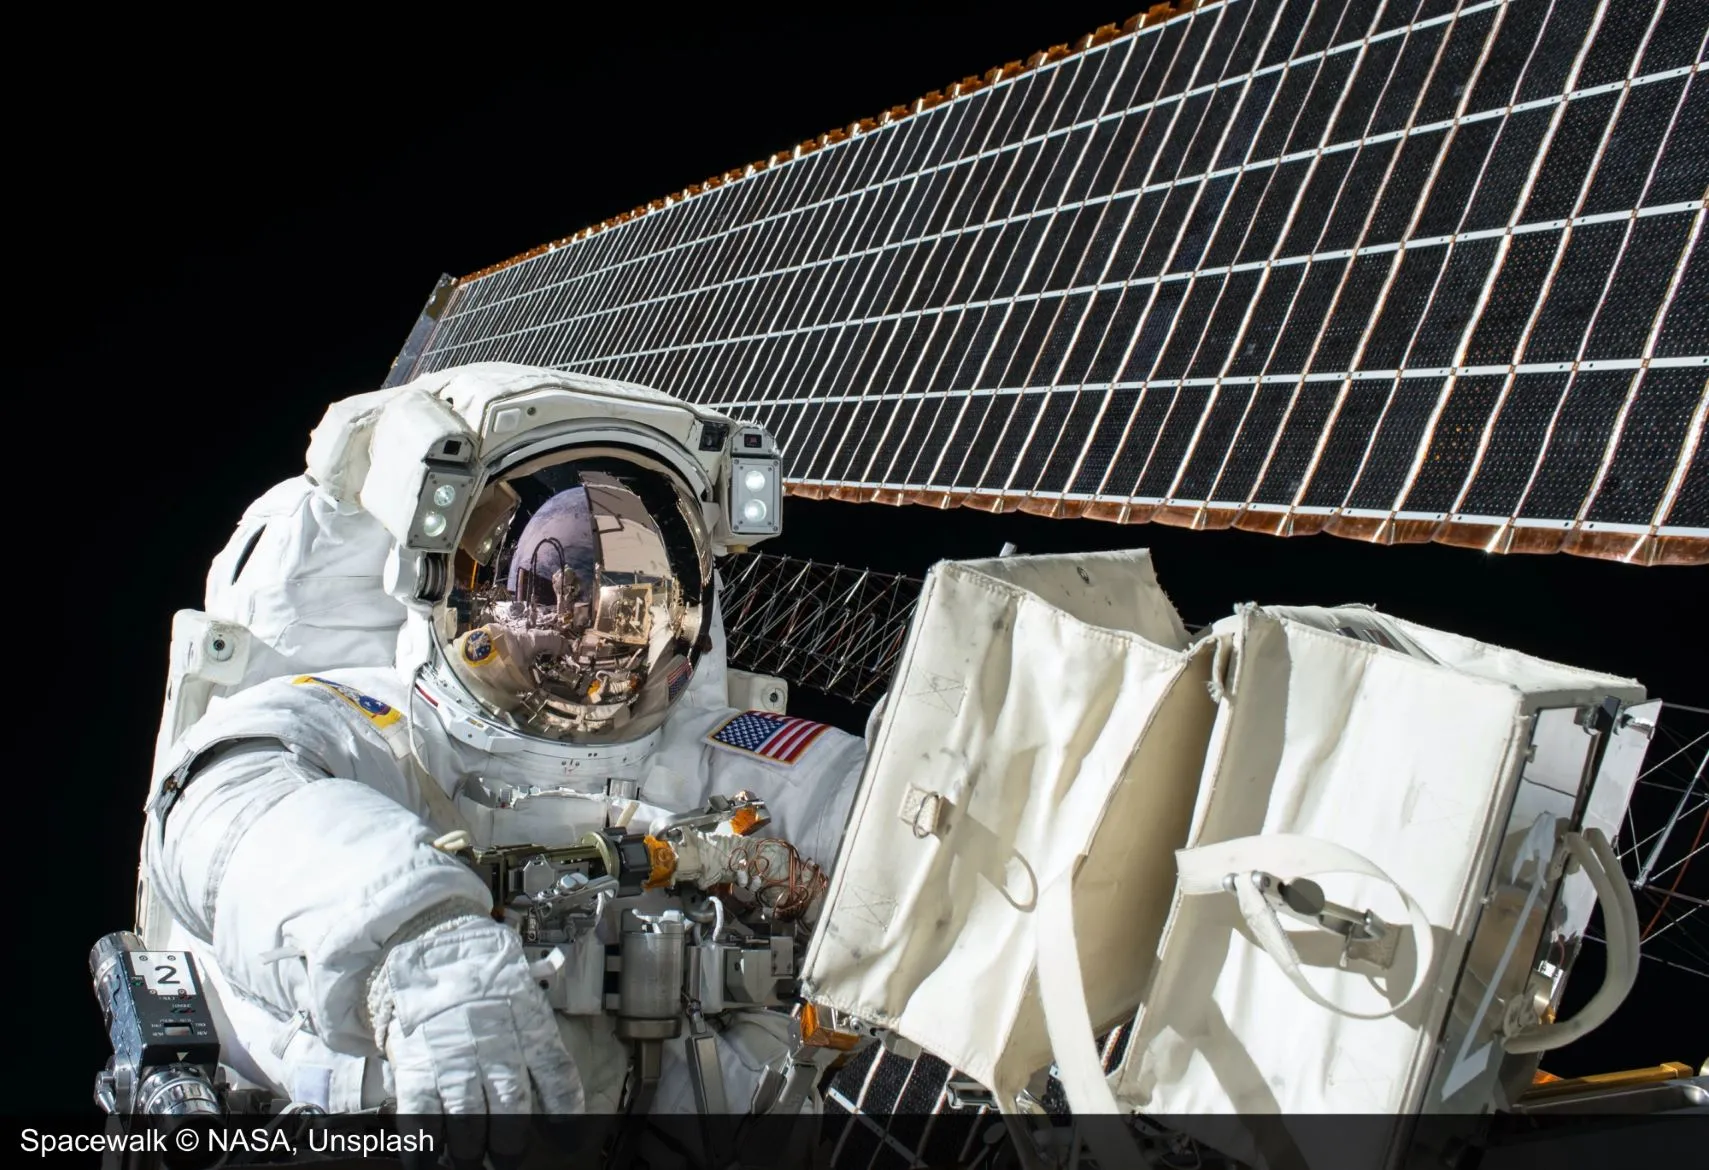 Spacewalk to Install UK-built Terminal on International Space Station